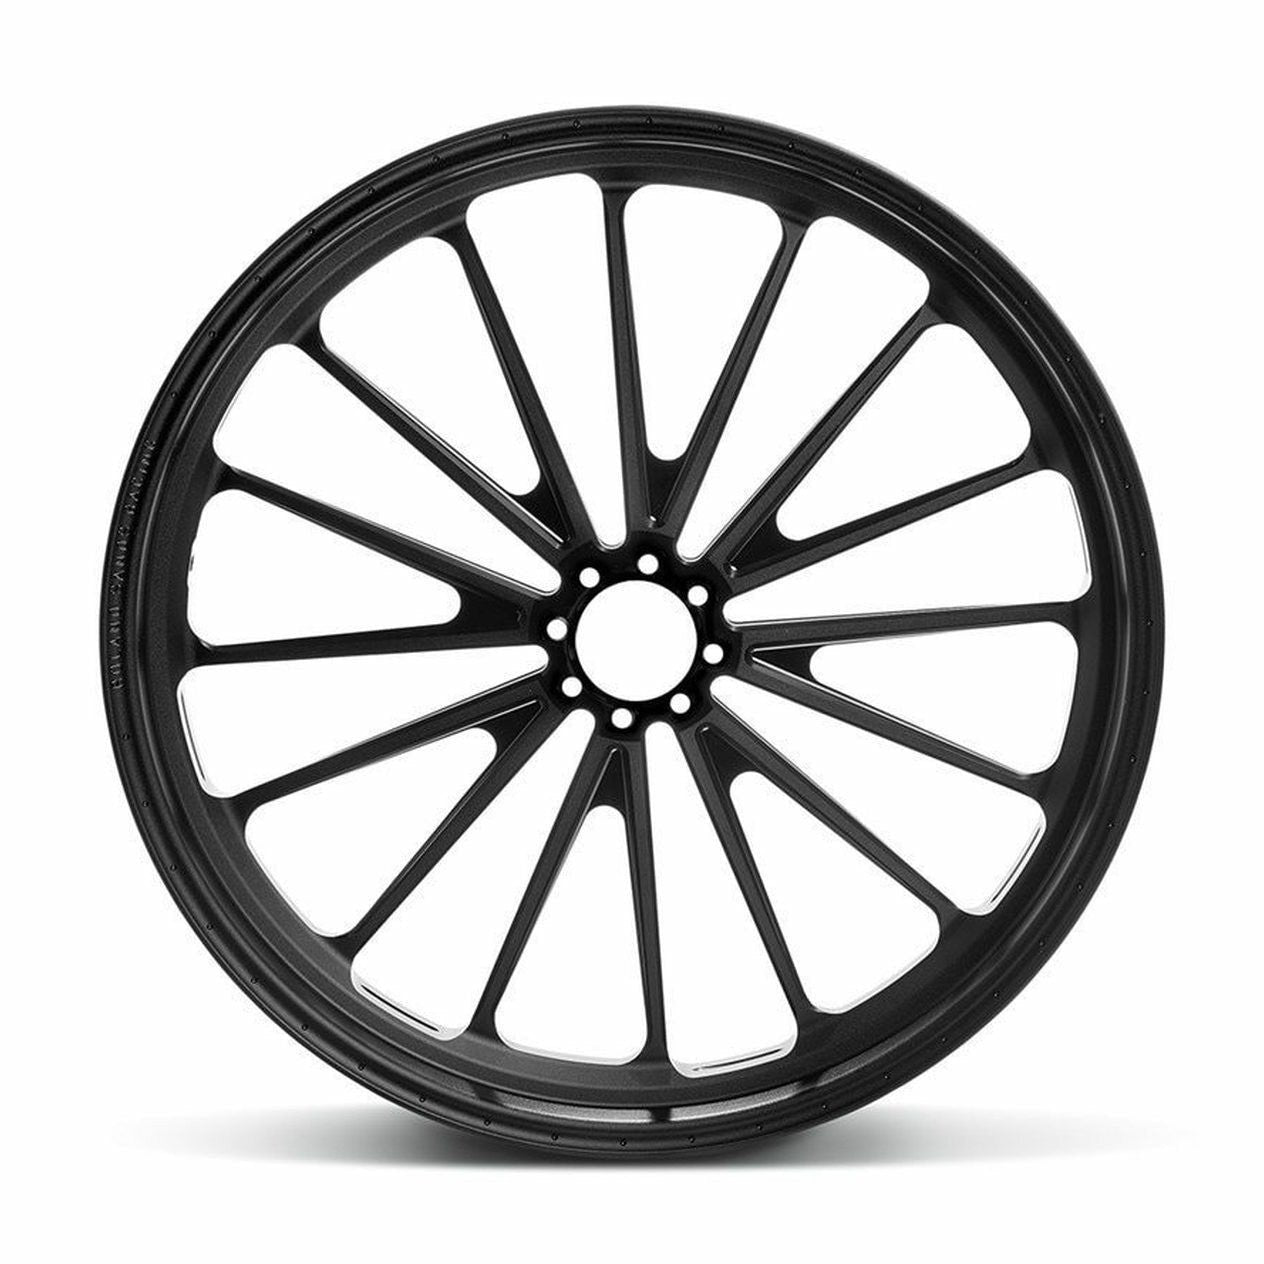 Traction Forged 450 DTX Flat Track Rear Race Wheel